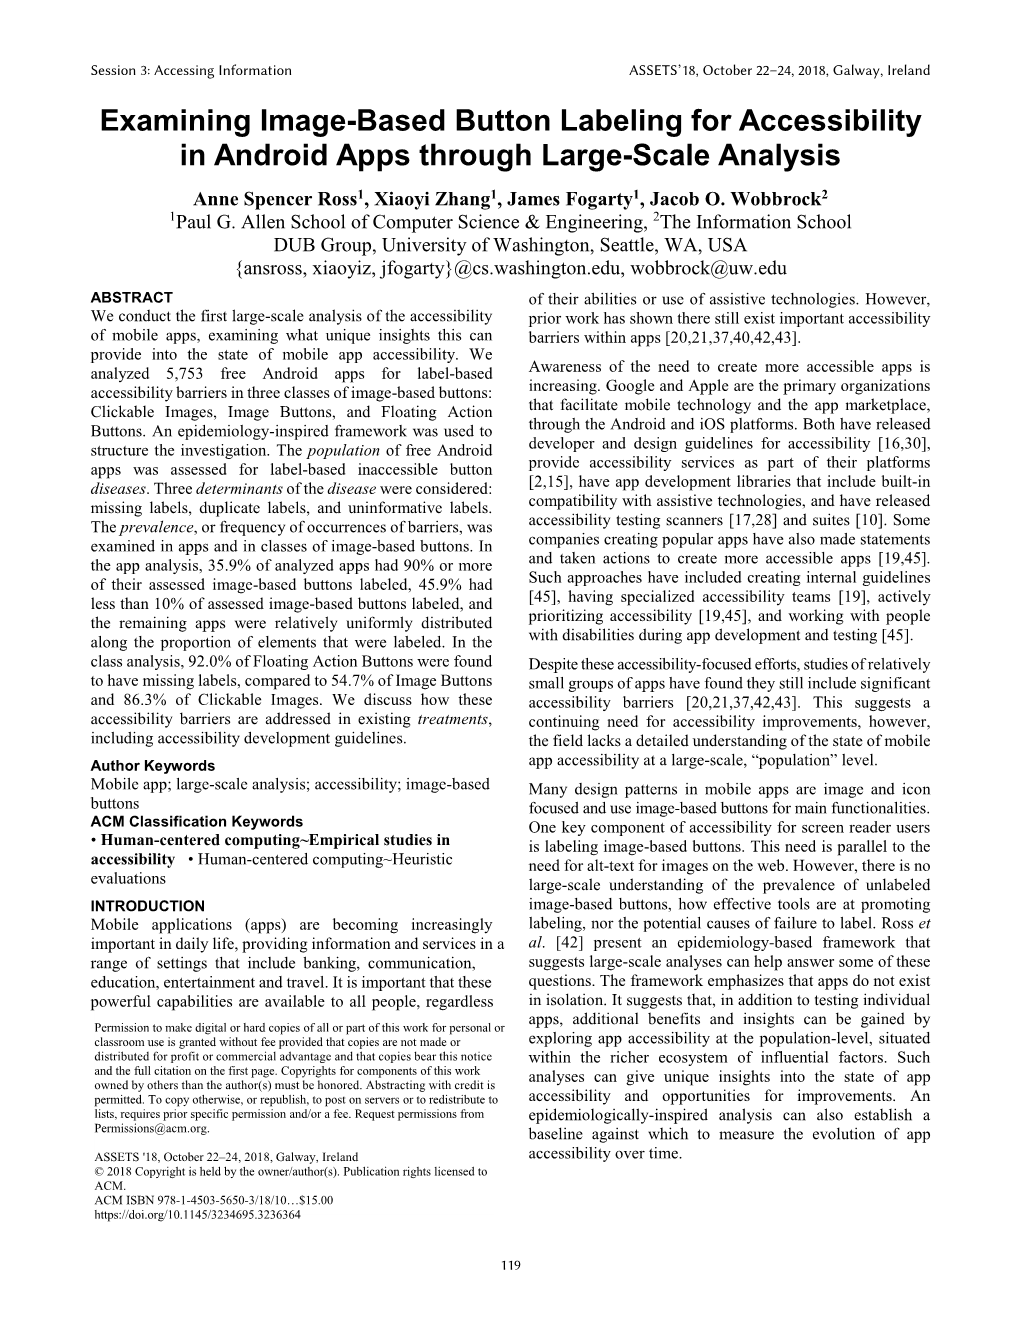 Examining Image-Based Button Labeling for Accessibility in Android Apps Through Large-Scale Analysis Anne Spencer Ross1, Xiaoyi Zhang1, James Fogarty1, Jacob O